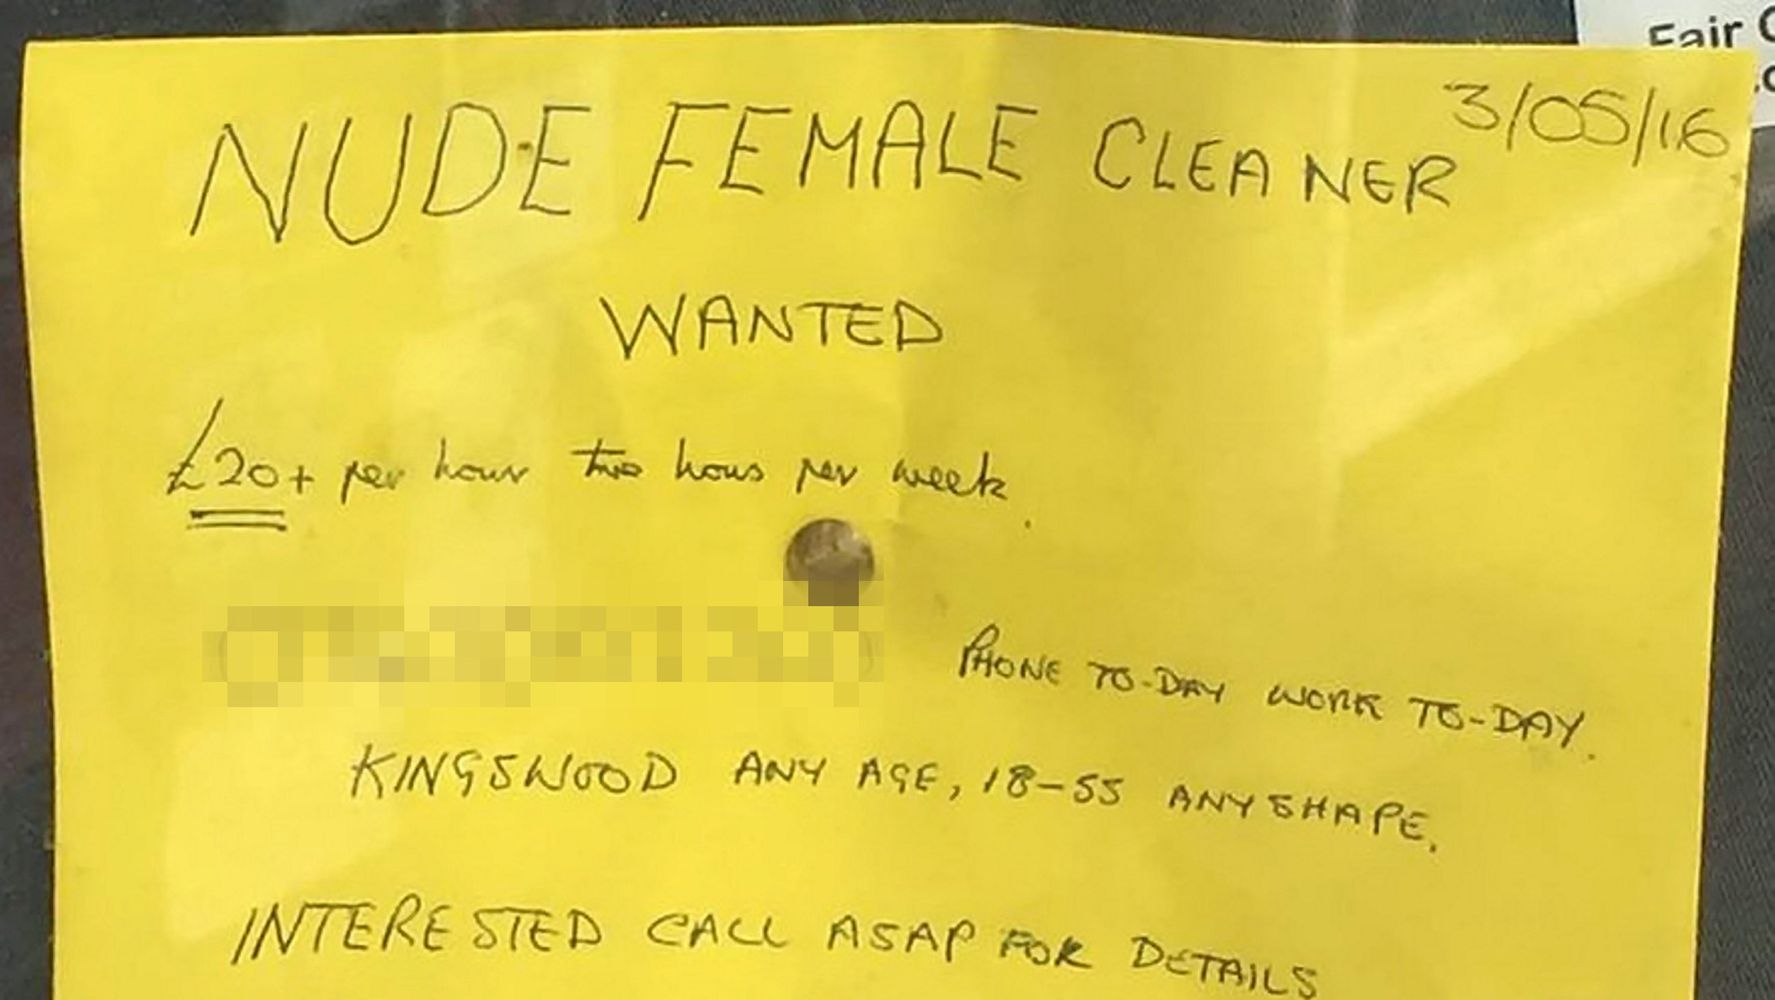 Voyeur Group Nudes - Naked Cleaner Ad In Newsagent's Window Yields Eight Applications For  70-Year-Old 'Voyeur' | HuffPost UK Comedy